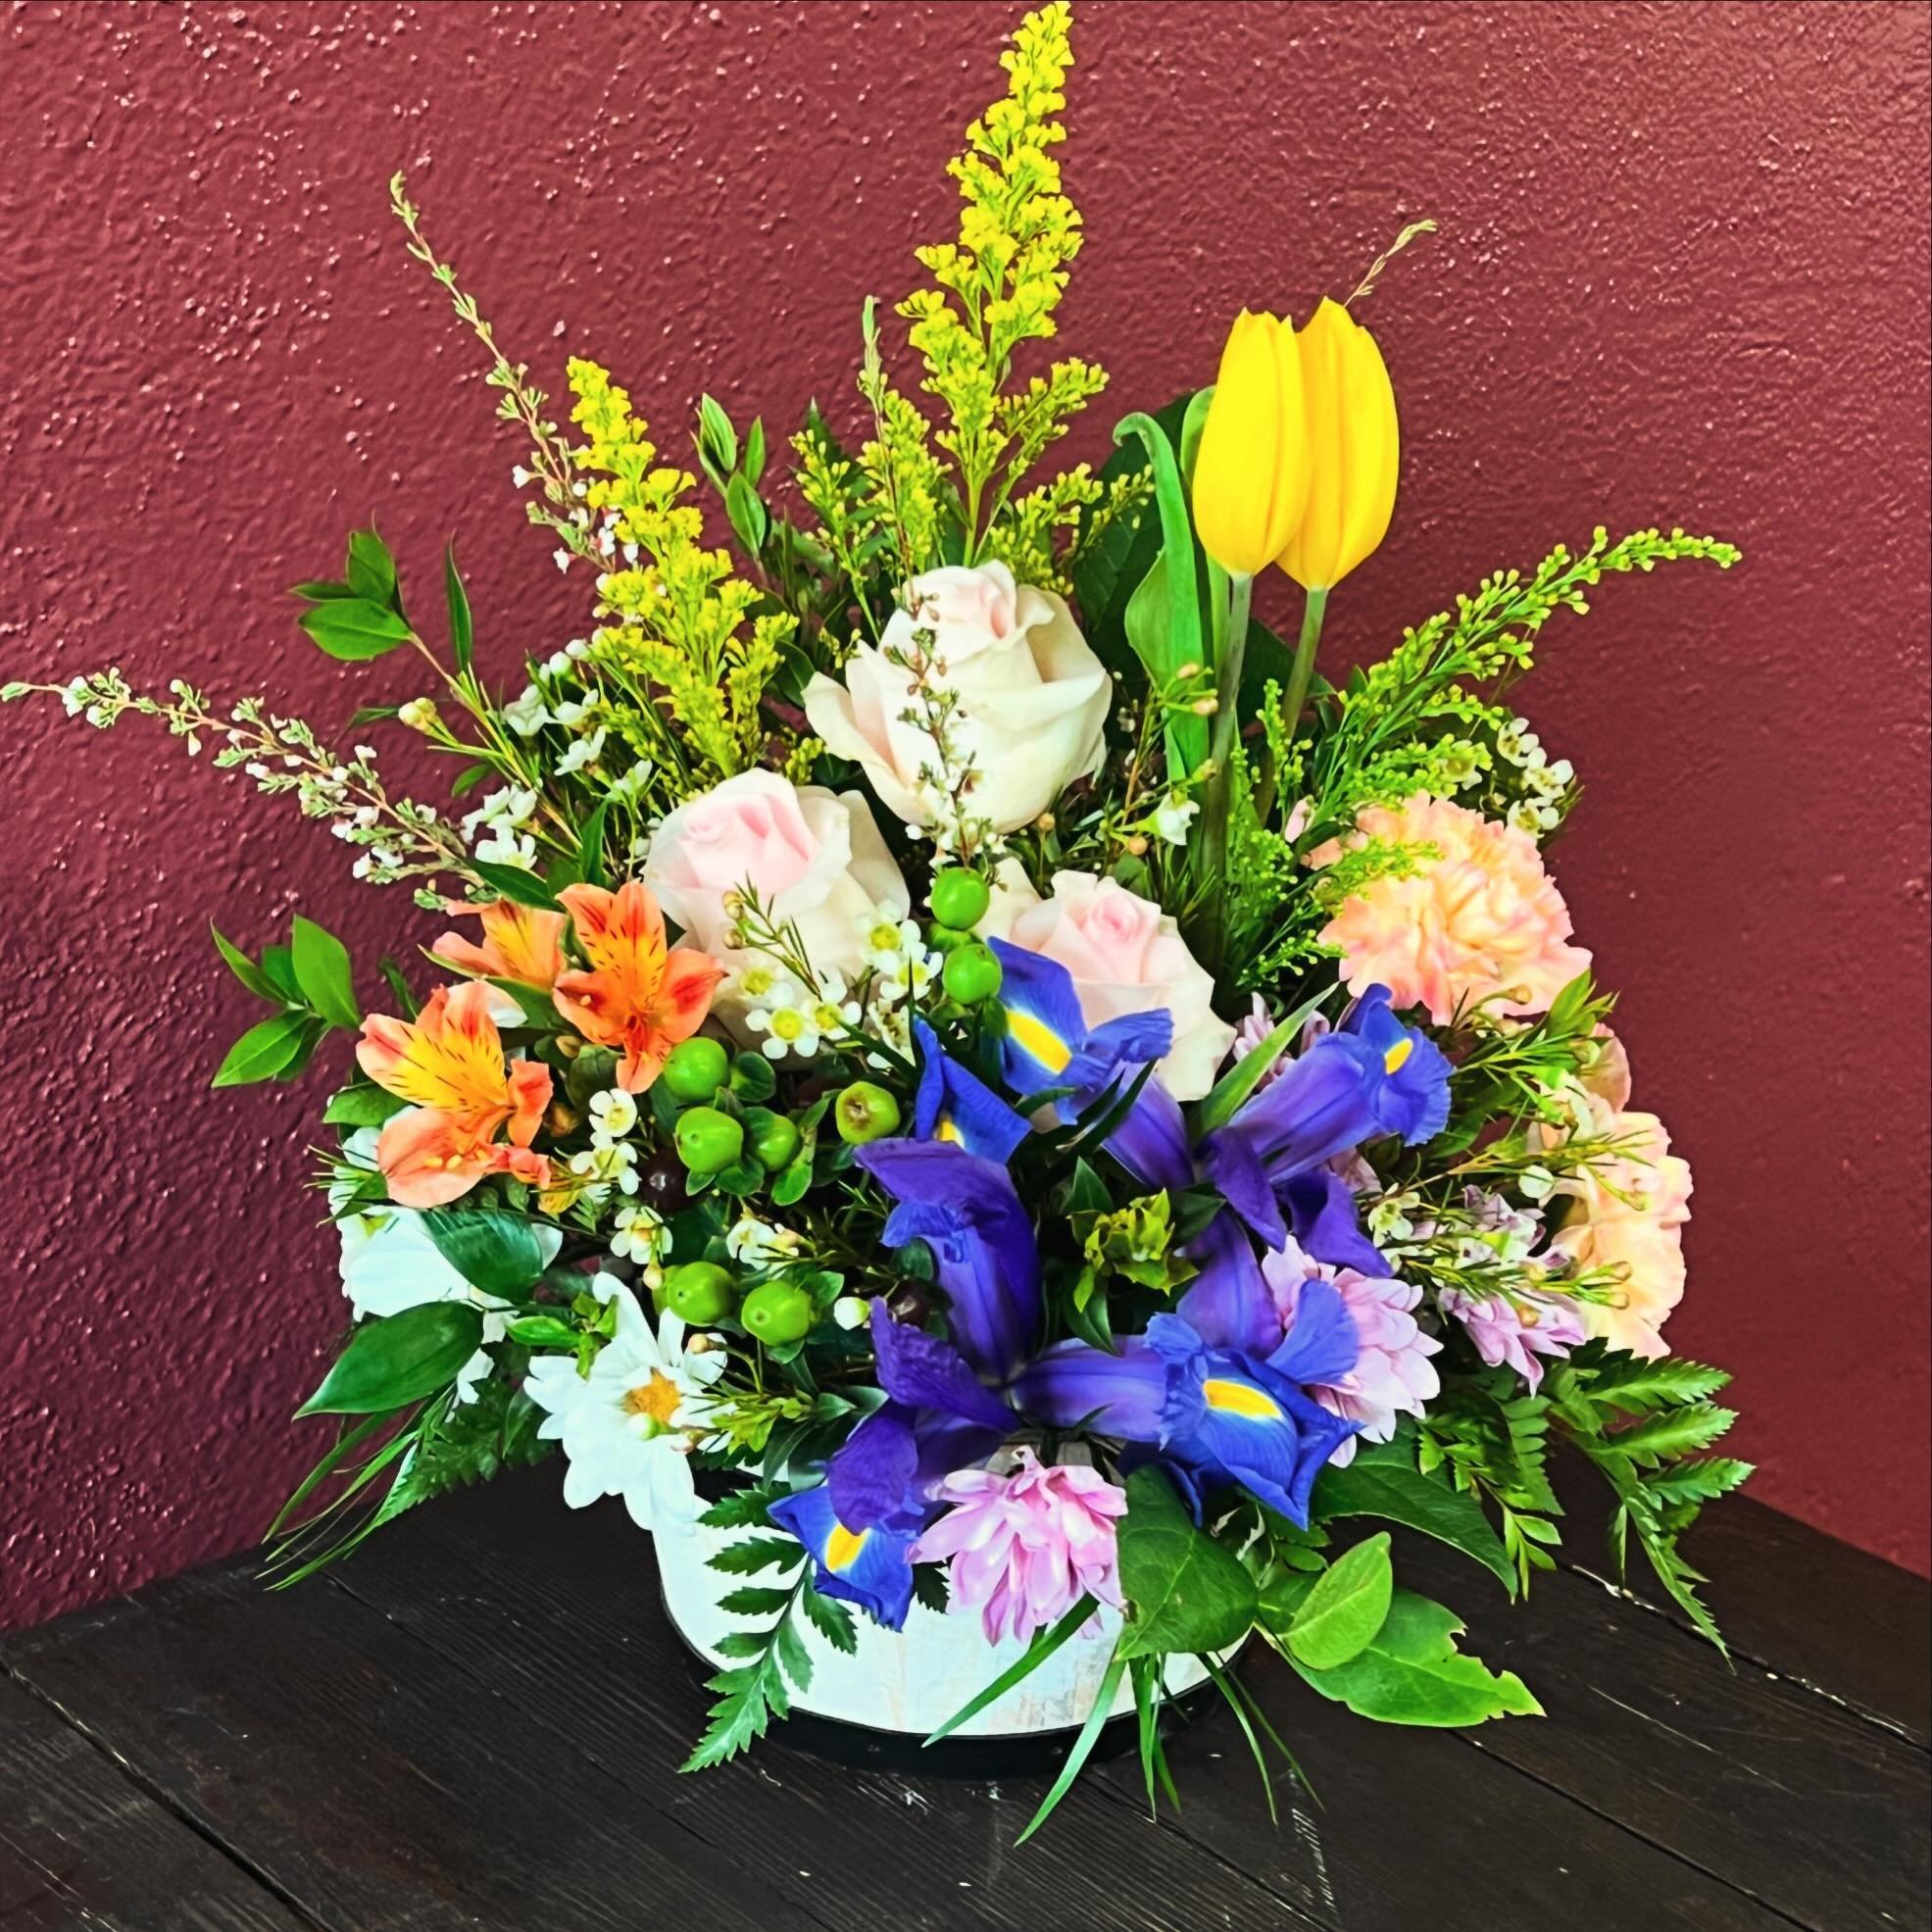 Mother&rsquo;s Day is quickly approaching! Visit us at https://www.mariasuncorked.com/floral-and-gifts/flowers-for-all-occasions/mothers-day to place your order! #mothersday #mariasuncorkedflorist #supportsmallbusiness #choosemarshall